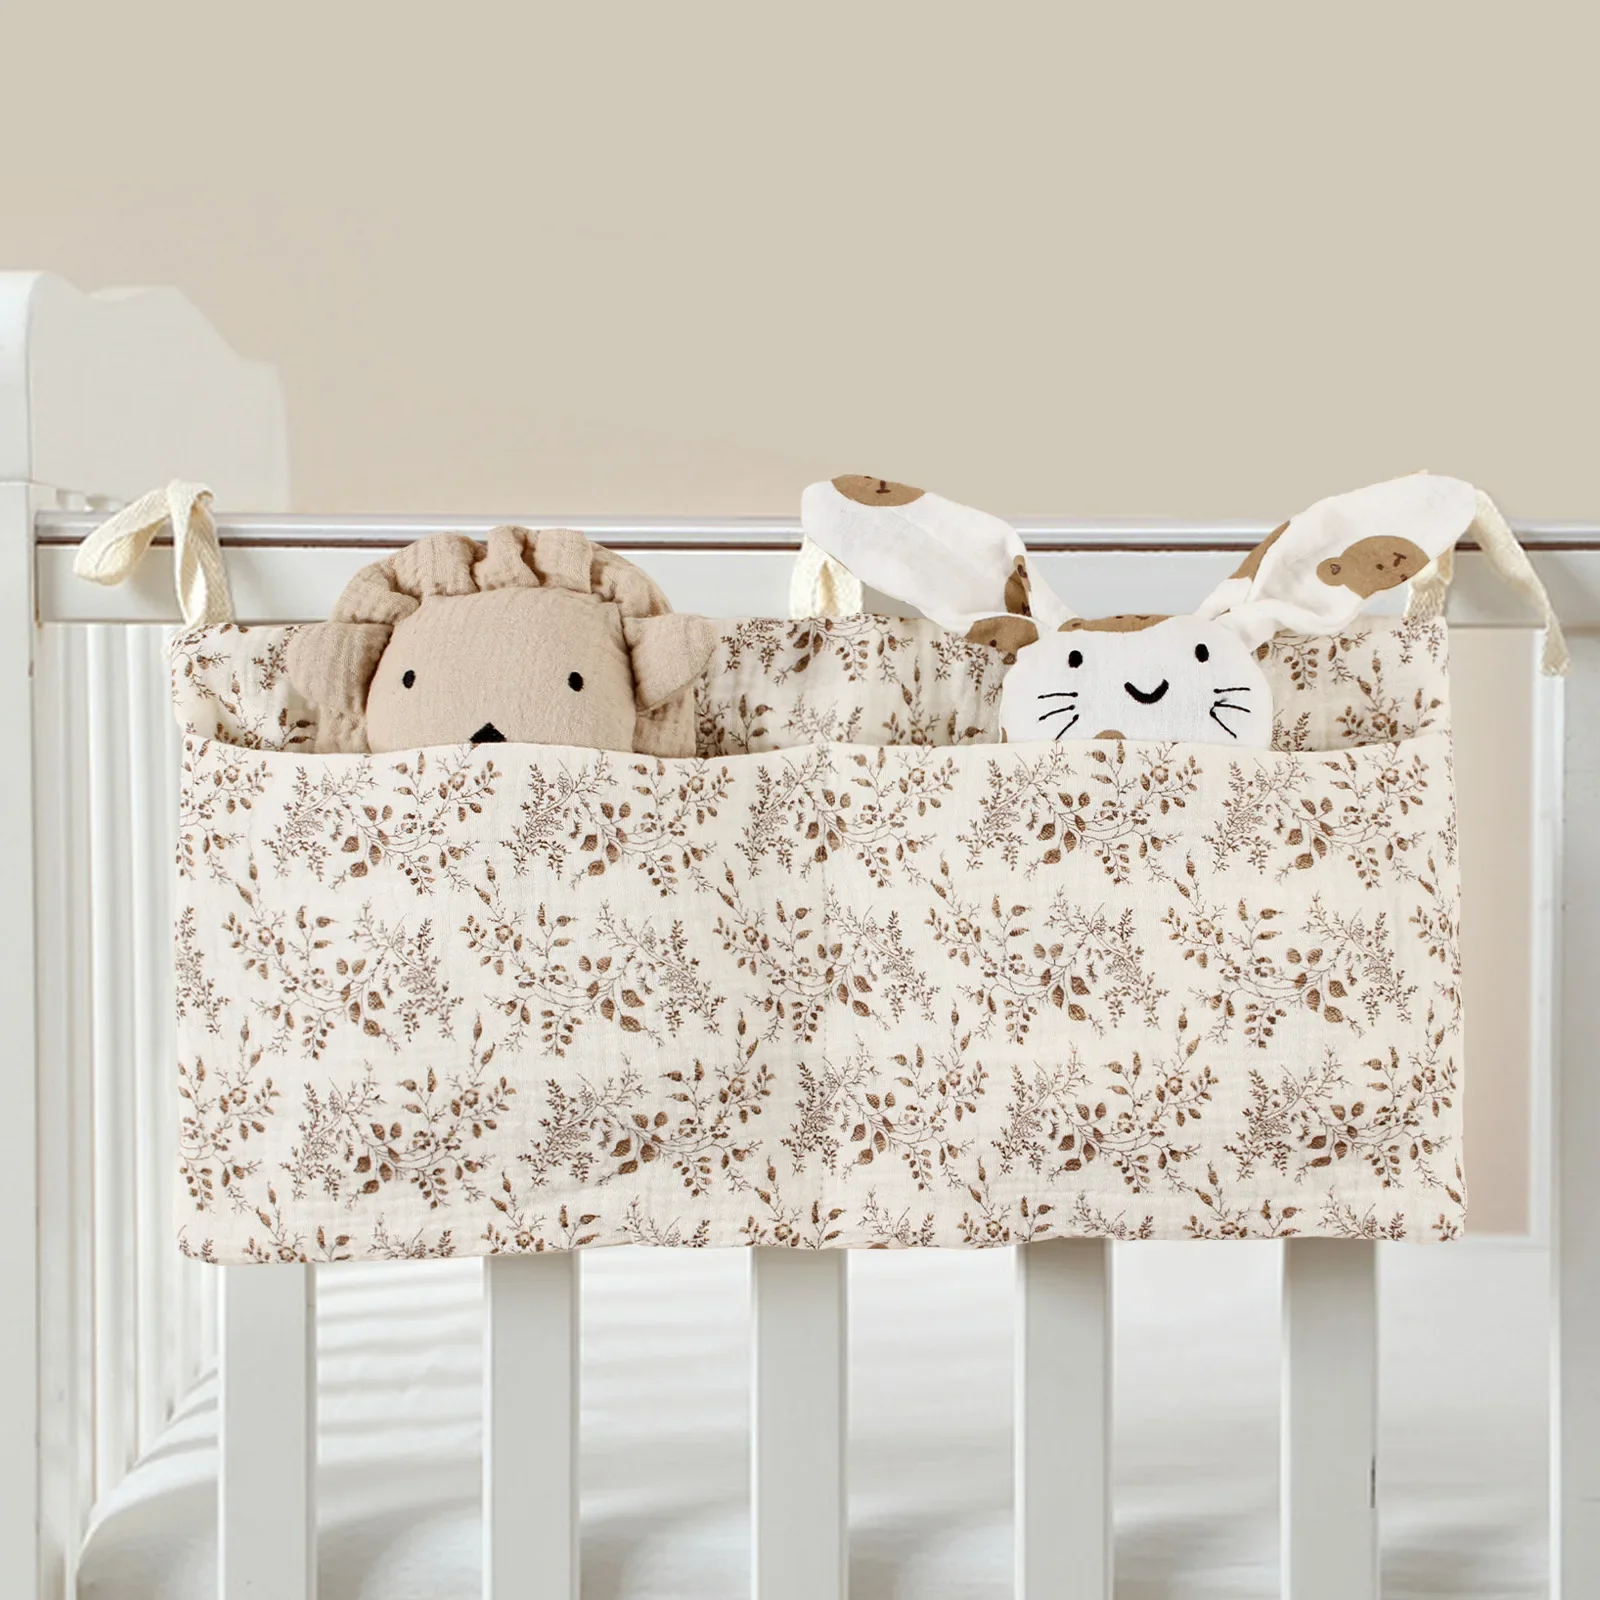 Cotton Bedside Diaper Bag Cute Baby Item Nappy Storage Bag Organizer Baby Crib Bottle Trolley Hanging Bag Bedding Caddy Stacker